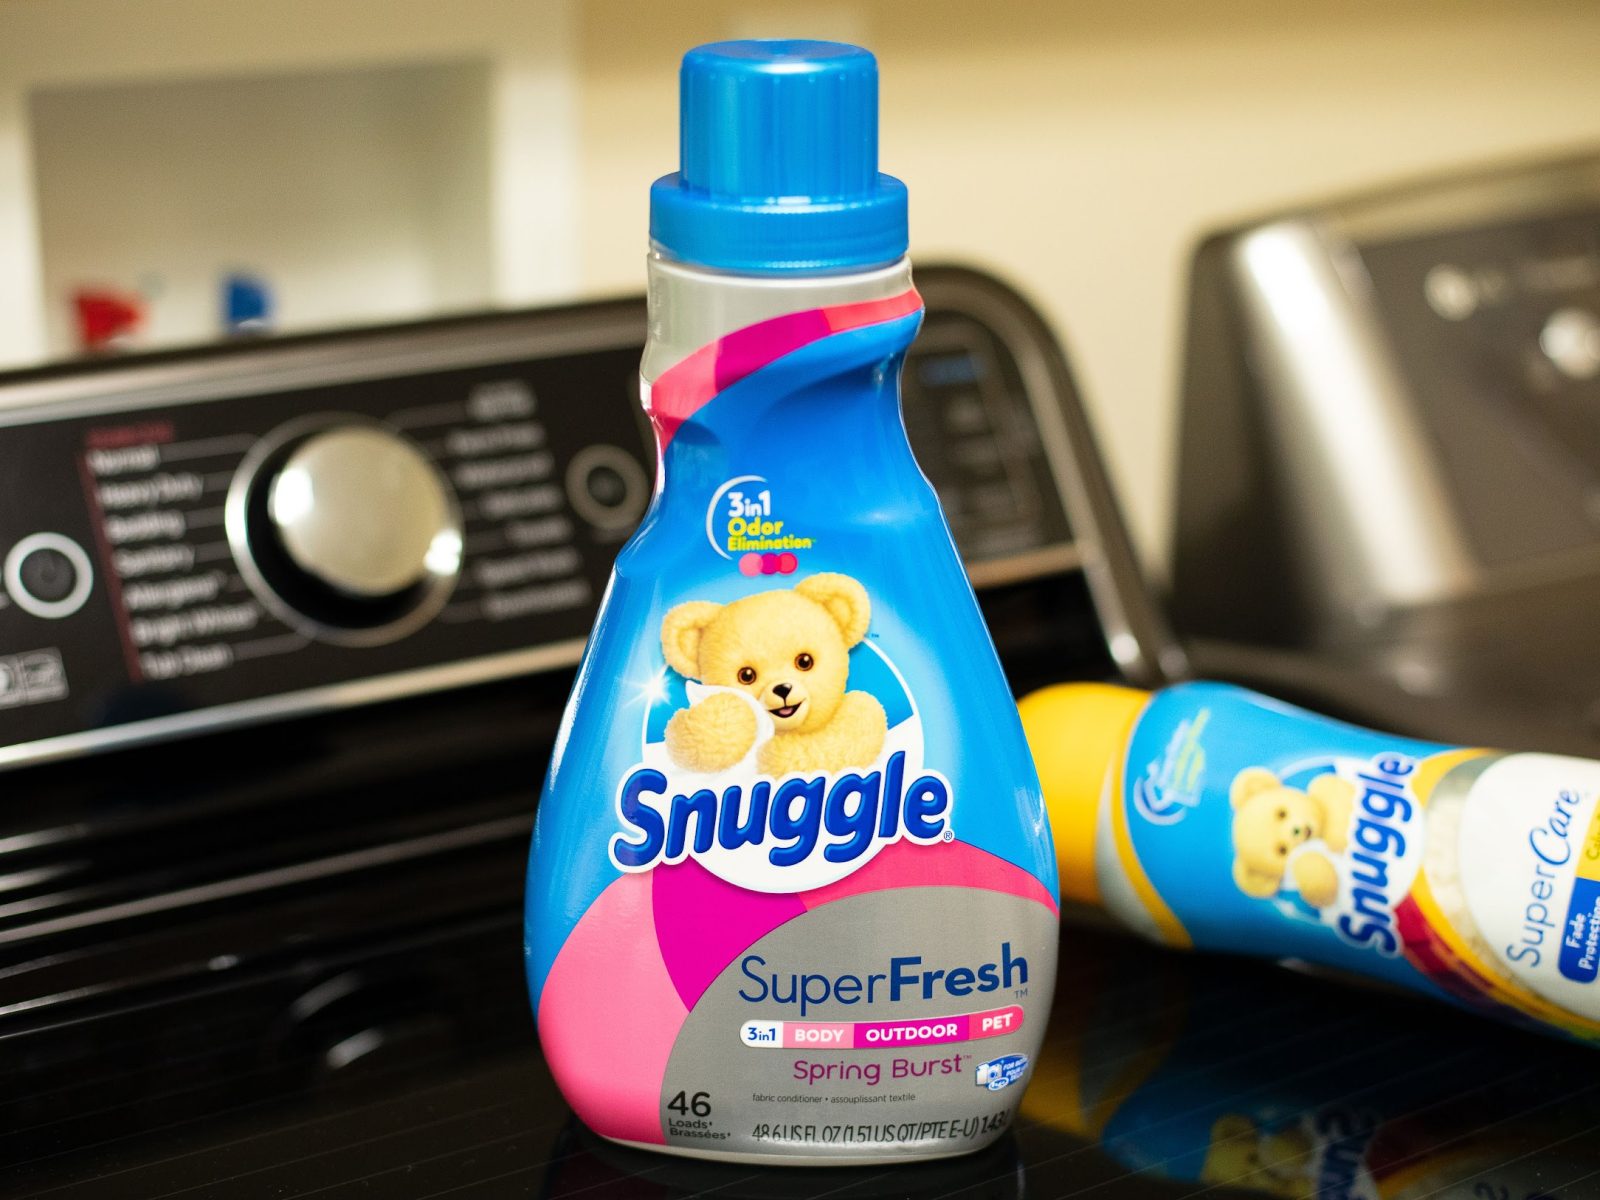 Snuggle Fabric Softener As Low As $3 At Publix